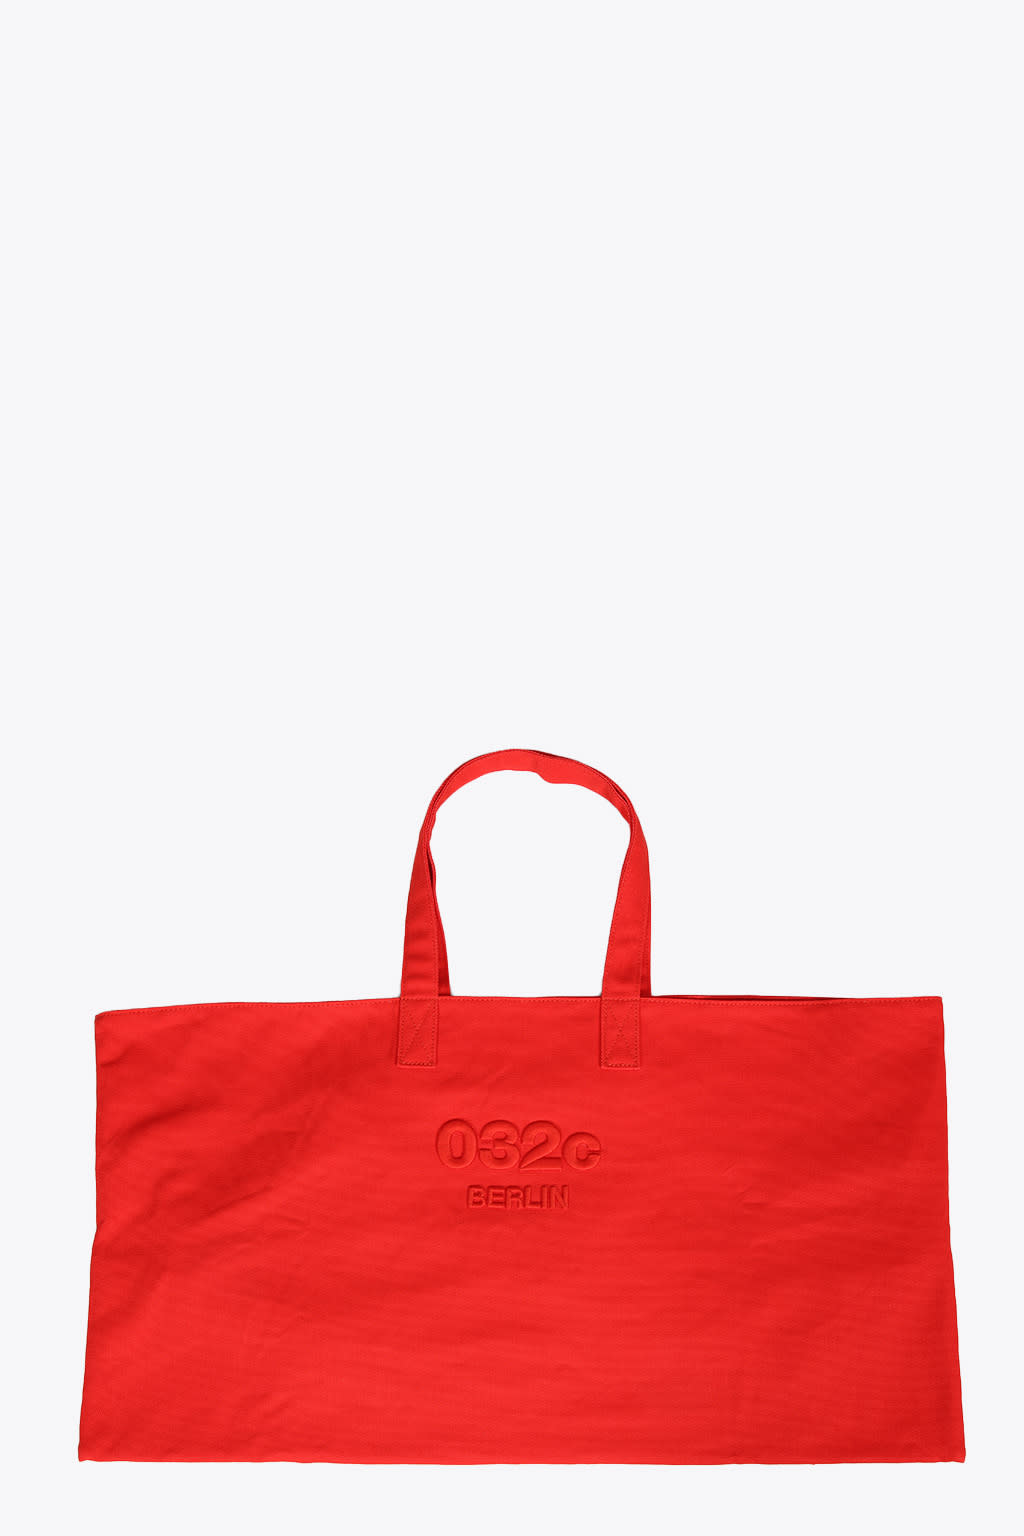 032c Weekend Bag Red Cotton Shopping Bag With Logo Embroidery